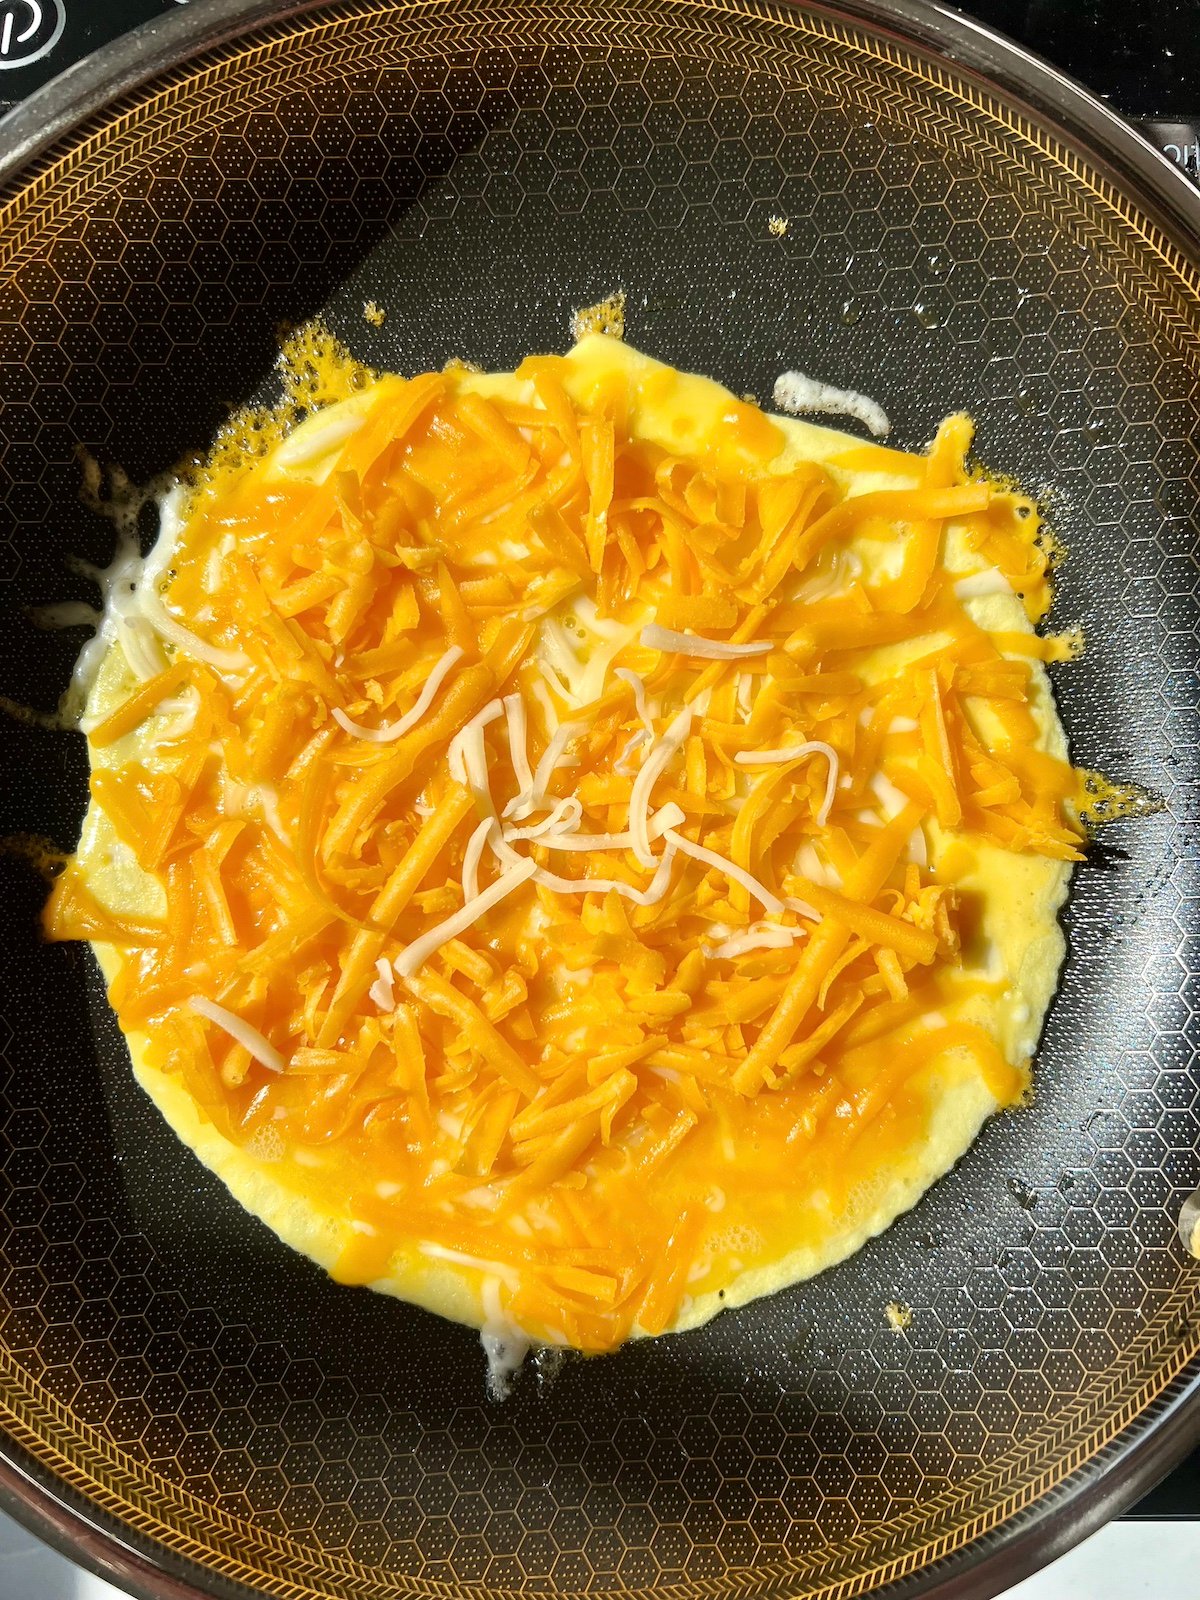 Shredded cheese on top of omelette in pan.